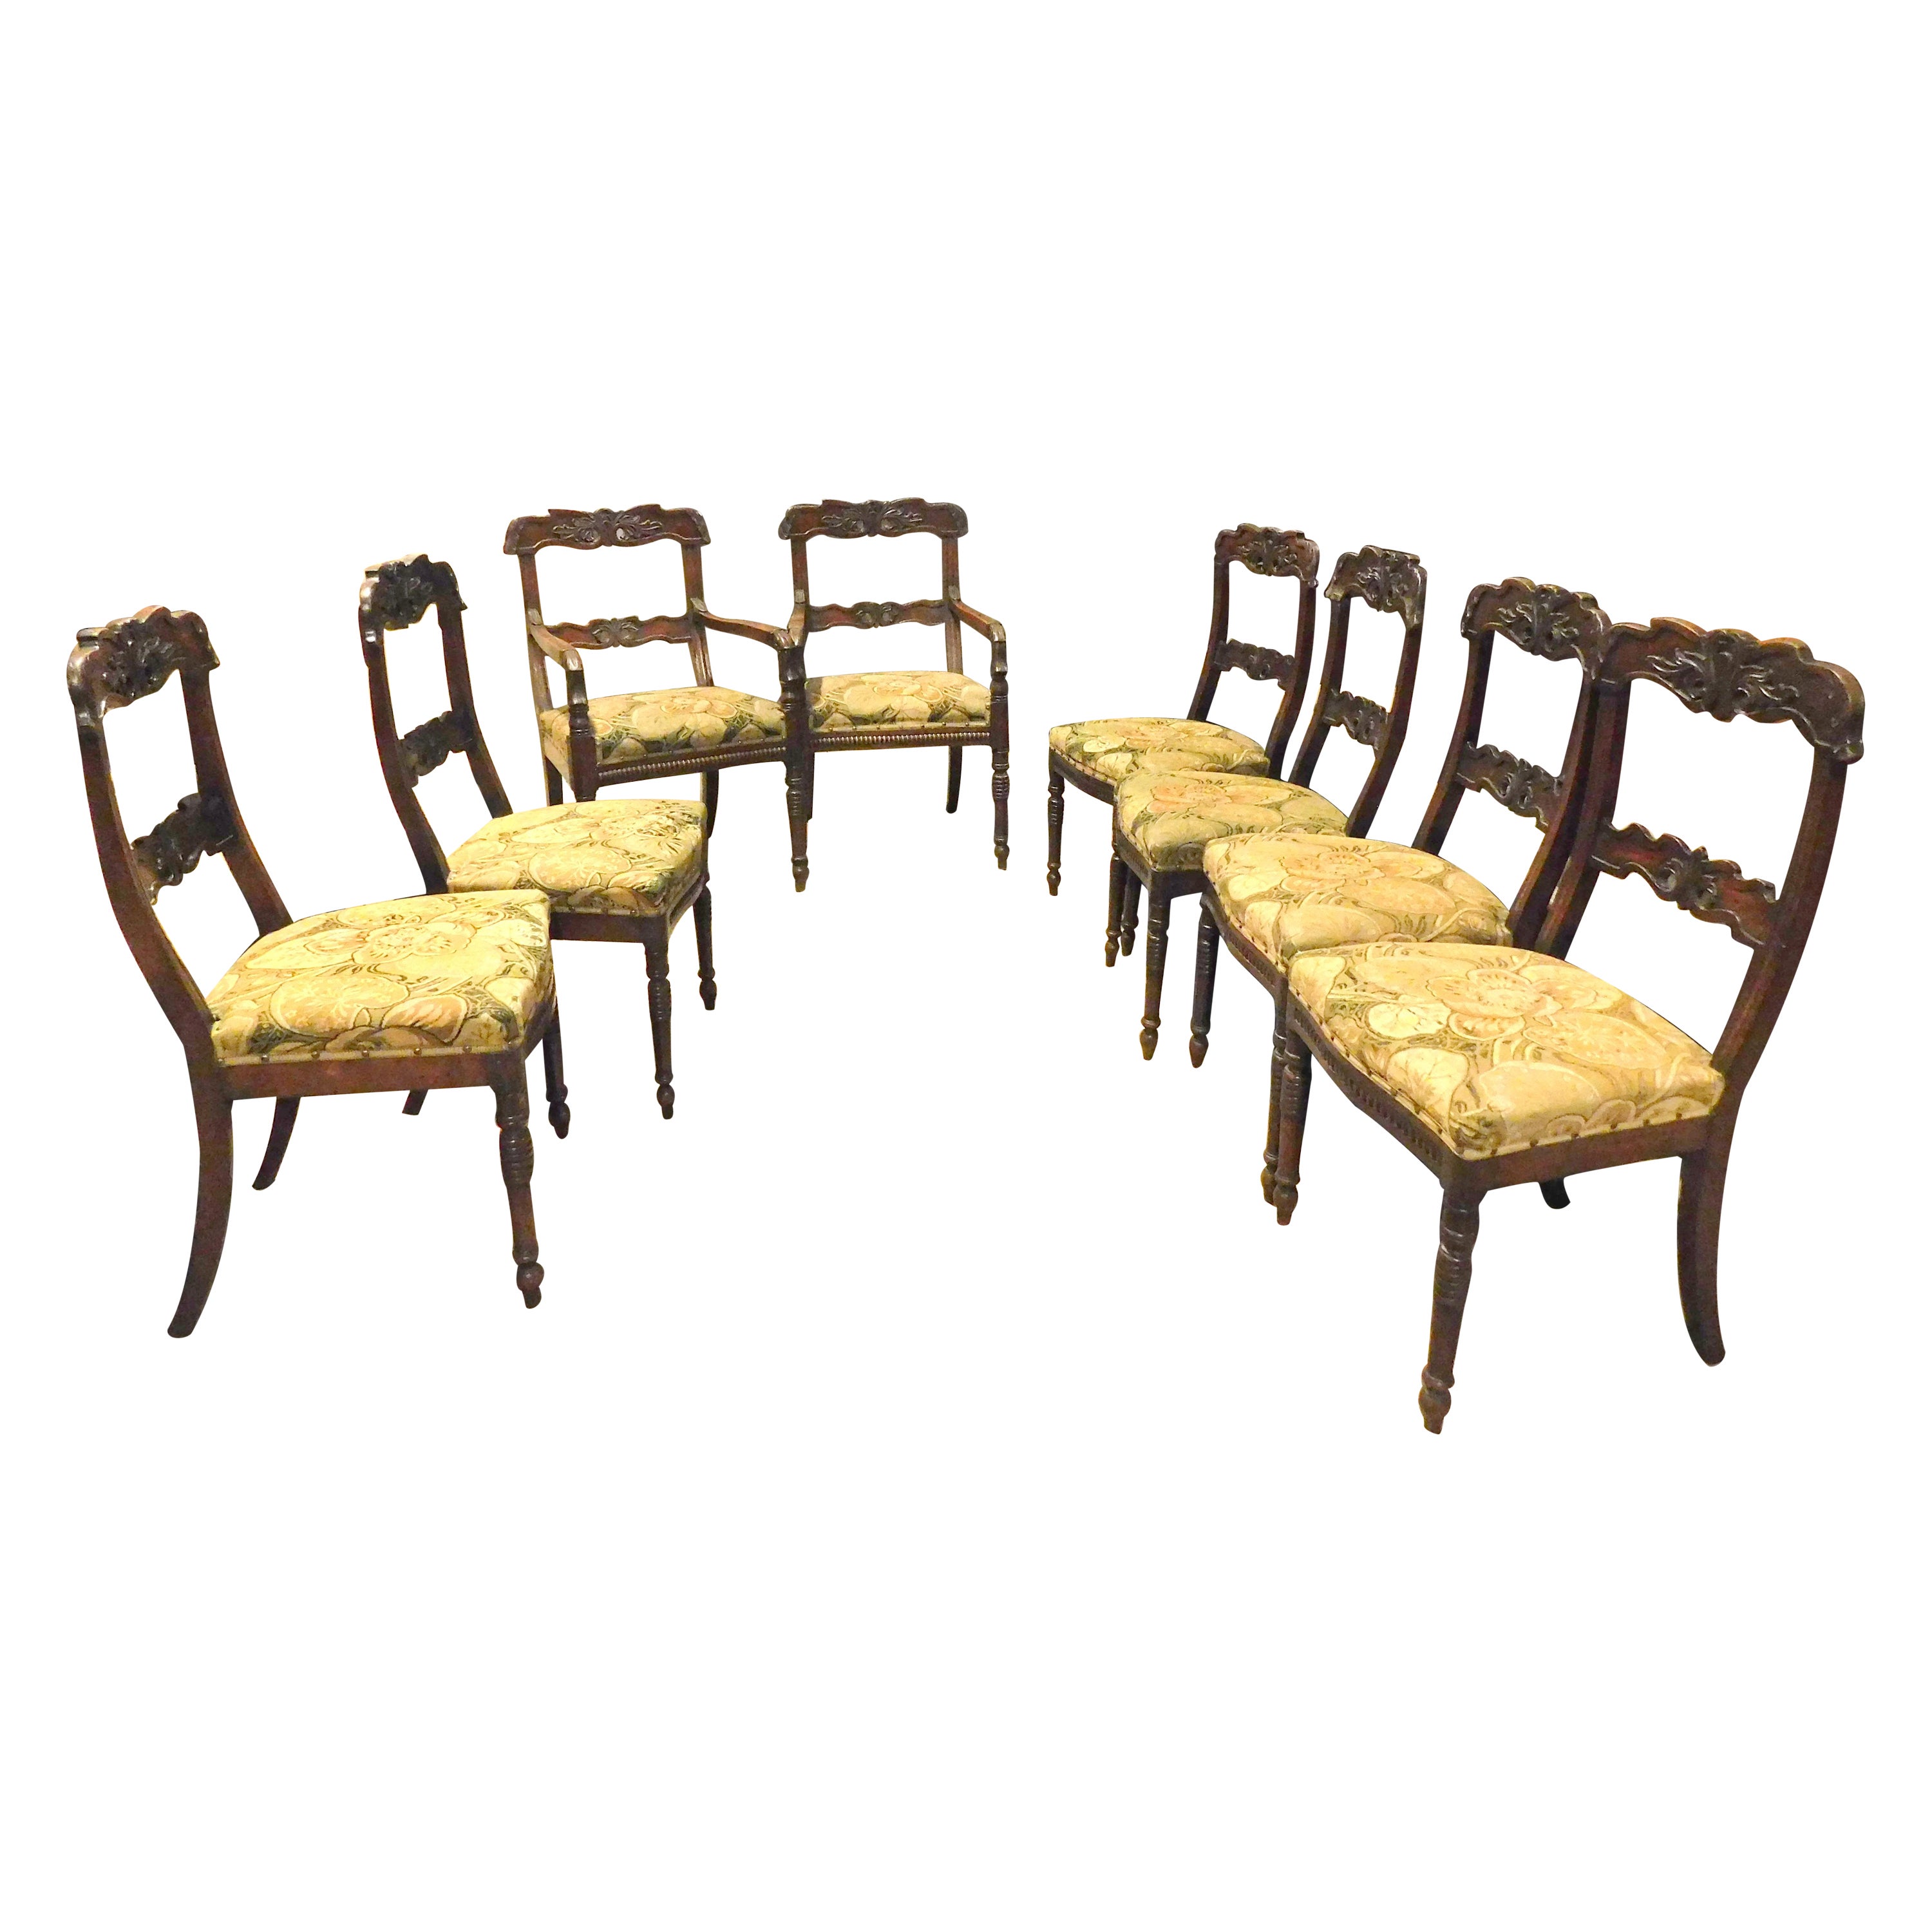 Antique Walnut Living Room Set of 6 Chairs and 2 Armchairs, 19th Century Italy